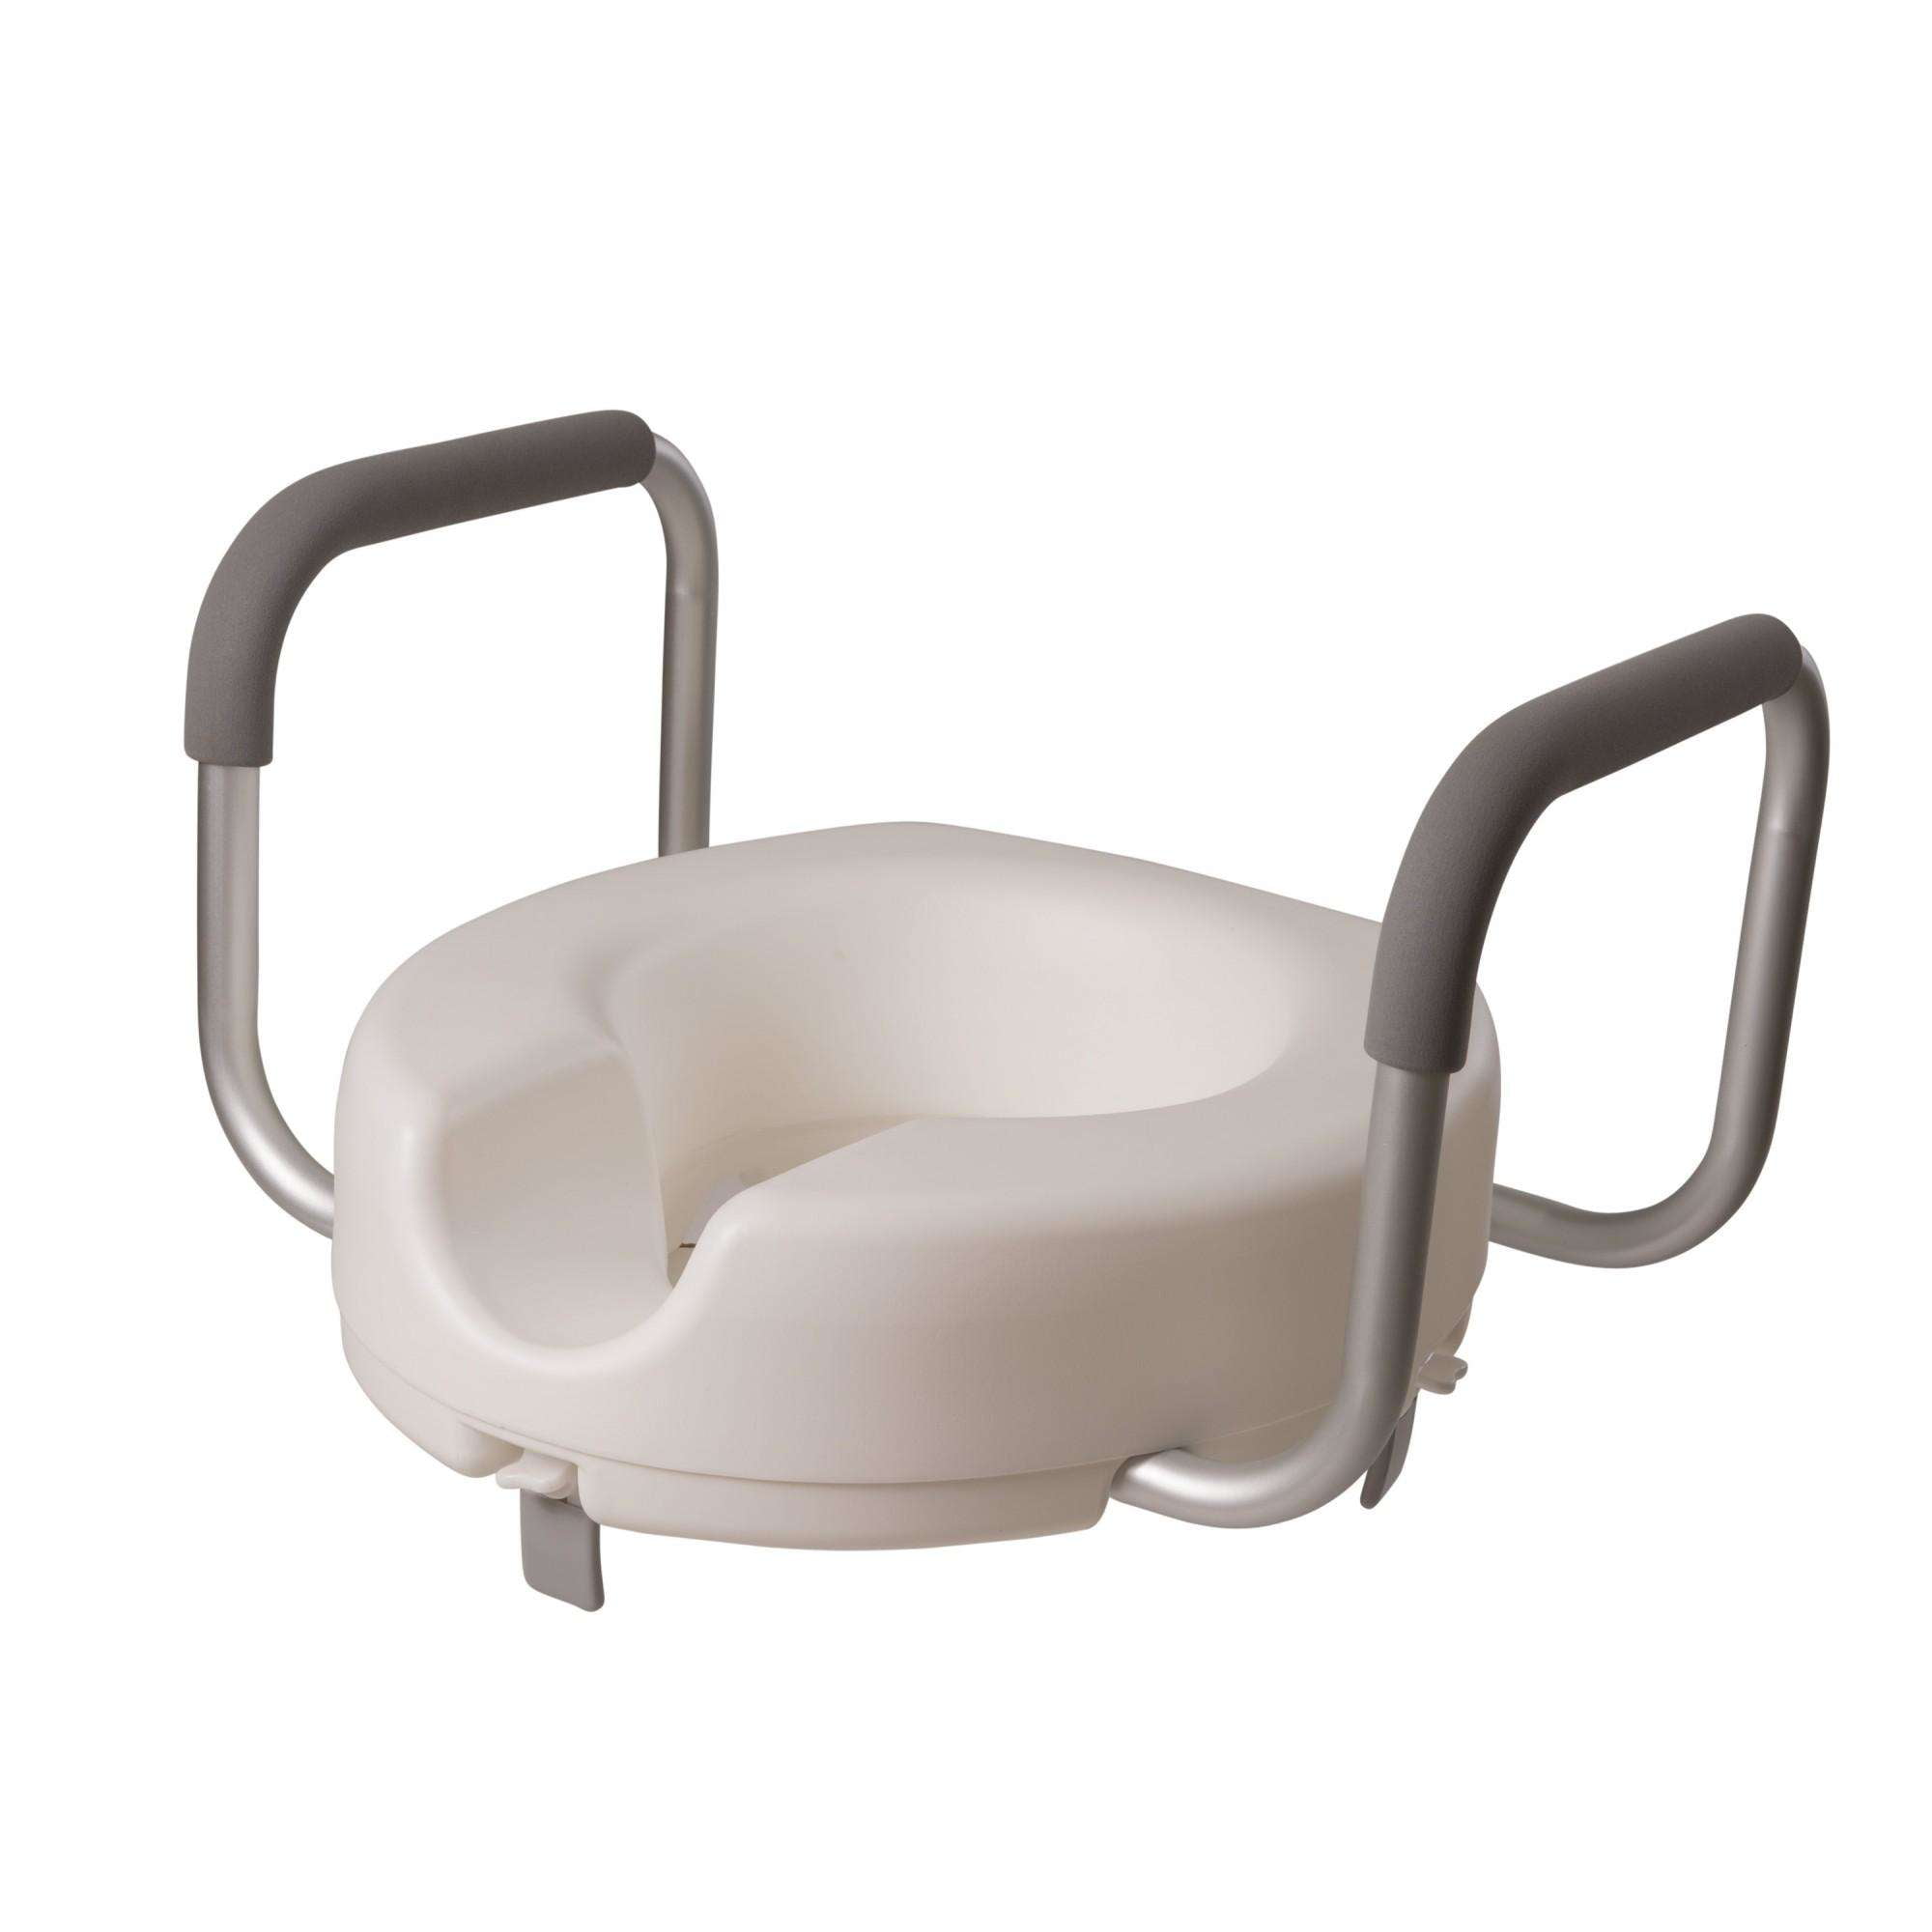 DMI Elevated Raised Locking Toilet Seat with Armrests for ...